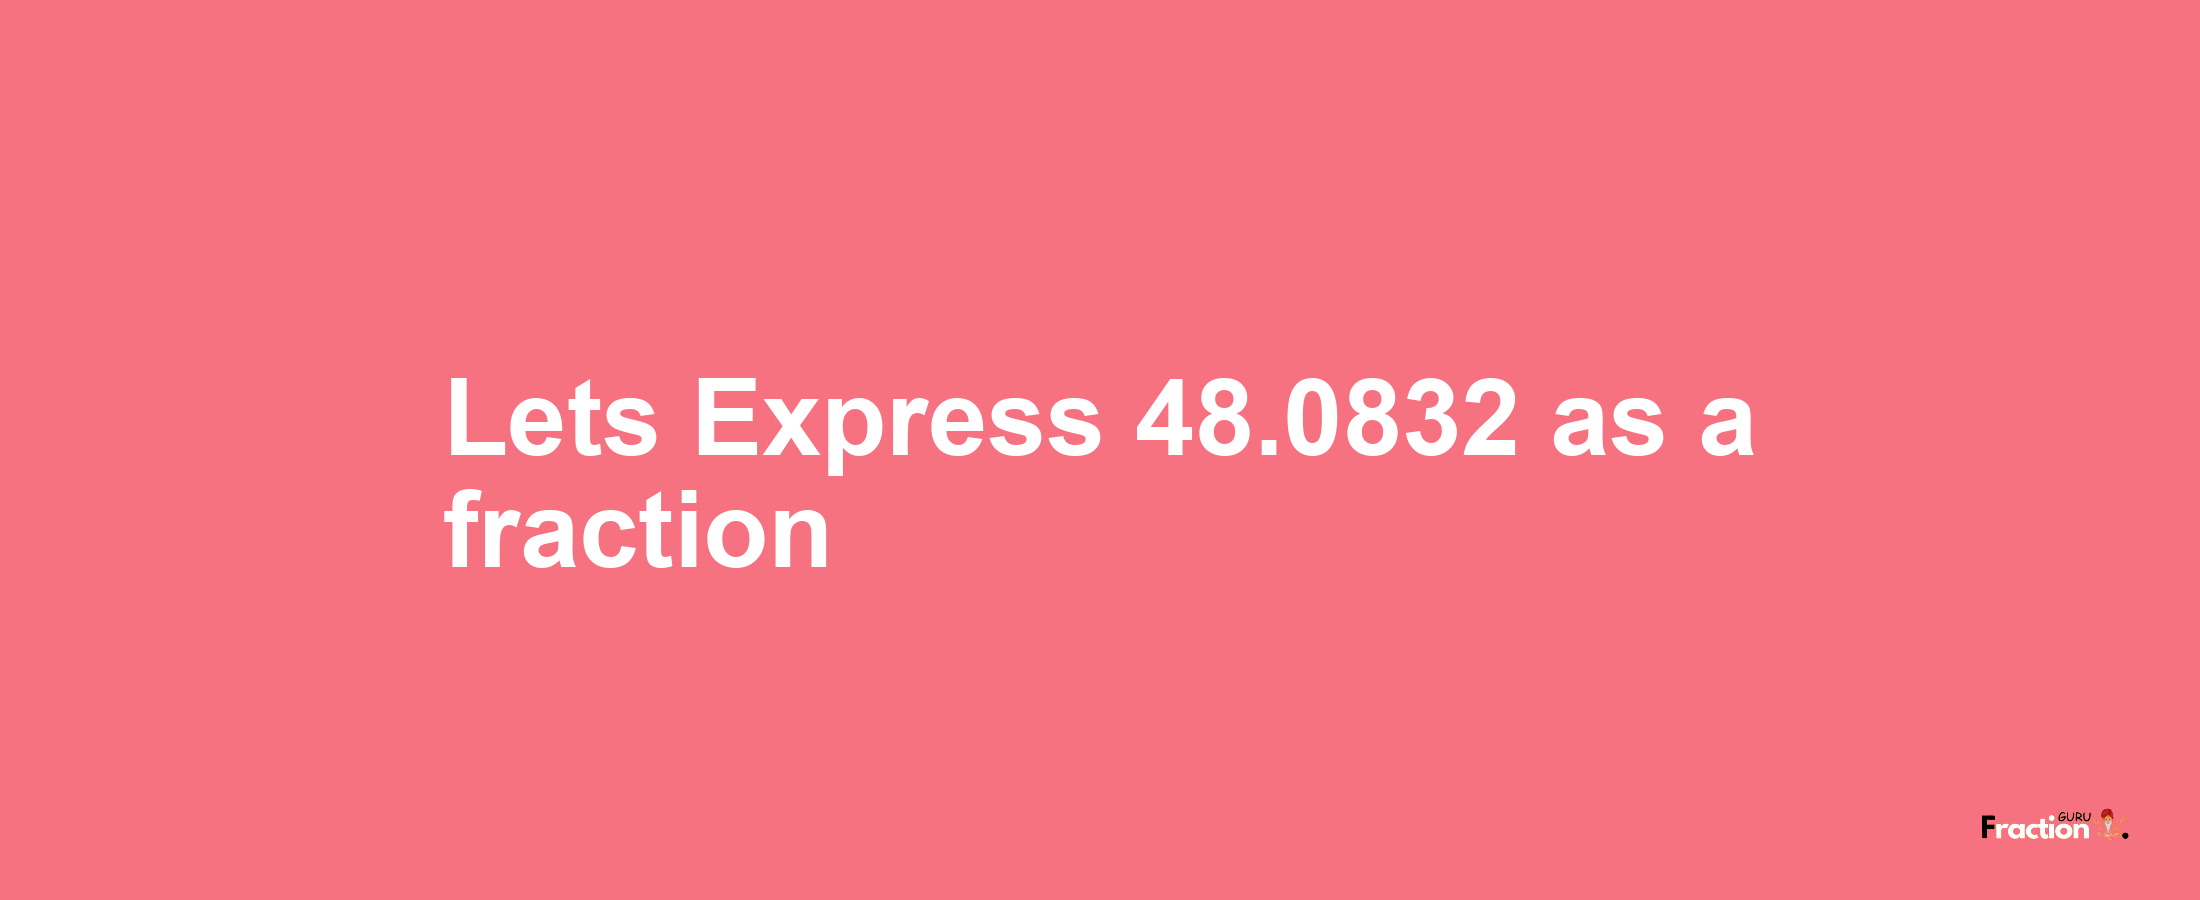 Lets Express 48.0832 as afraction